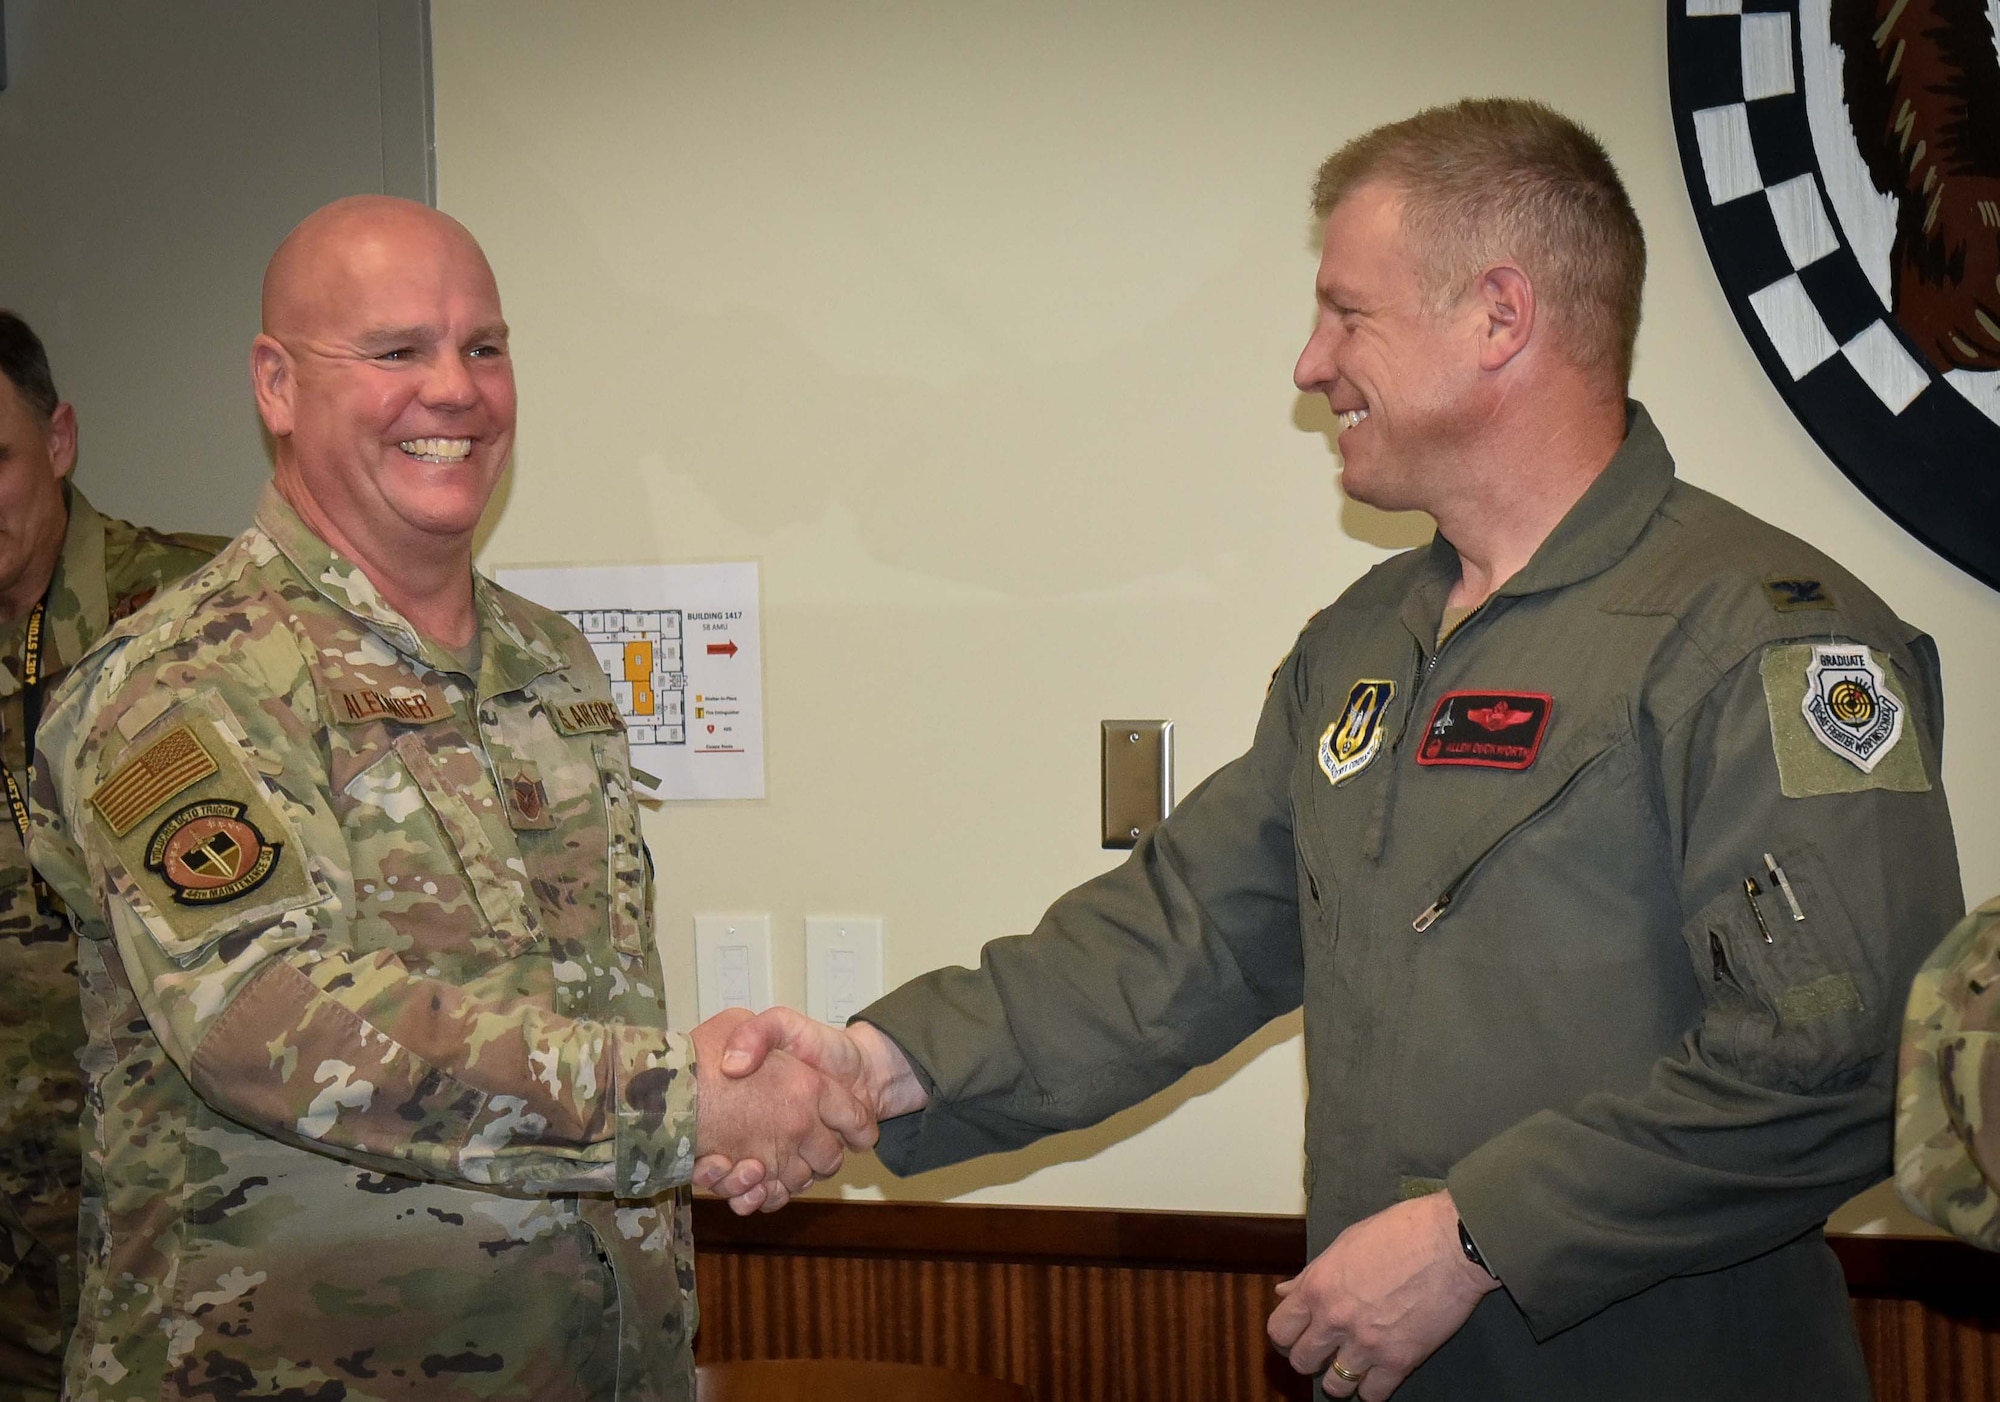 (right) 301st Fighter Wing Commander Col. Allen Duckworth gives his commander's coin to recognize Master Sgt. Gregory Alexander, 44th Fighter Group Aerospace Ground Equipment flight chief during the wing's visit to the 44 FG at Eglin Air Force Base, Fla., March 4. Alexander's willingness to go the extra mile and expertise in both the F-22 and F-35 airframes allowed him to ensure consistent mission operations and serve as a 44 FG anchor. (U.S. Air Force photo by Master Sgt. Jeremy Roman)